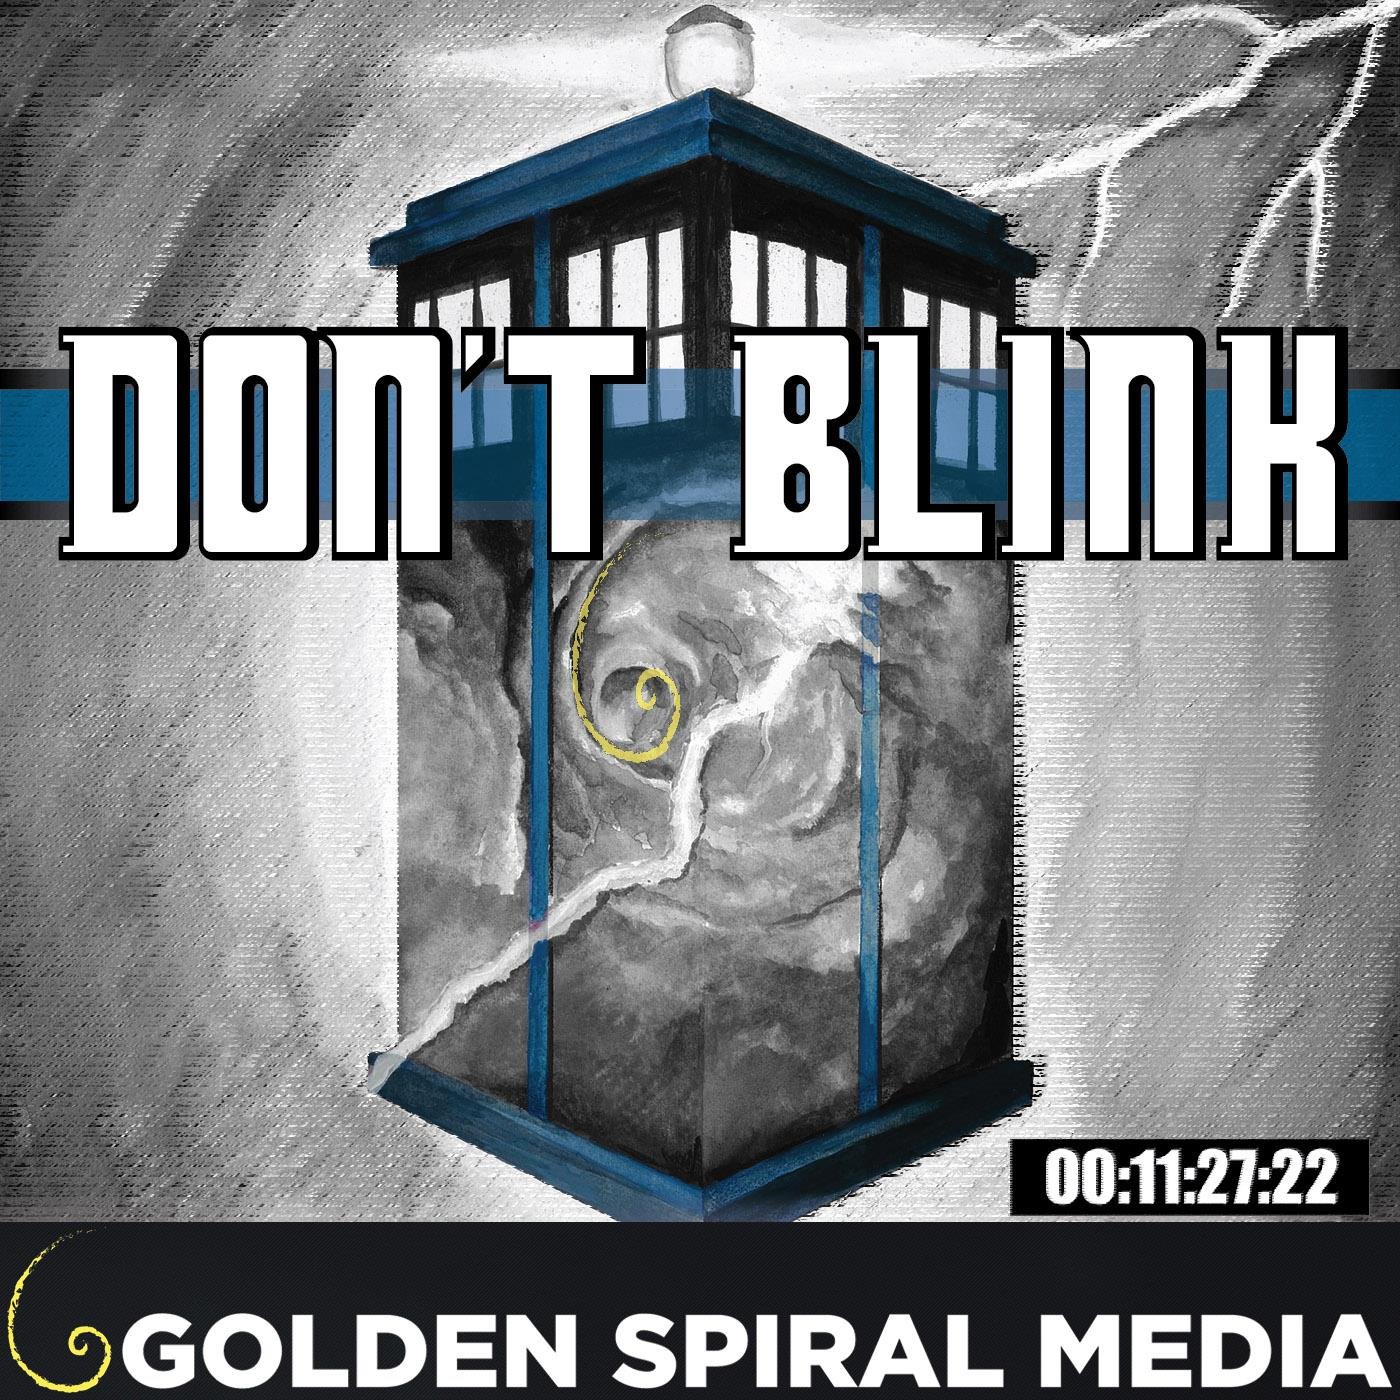 A #DoctorWho podcast from Golden Spiral Media. We are @WayneHenderson and @StorysVoice at https://t.co/8aJ2wug6TJ #Whovian #Tardis #ItsAboutTime